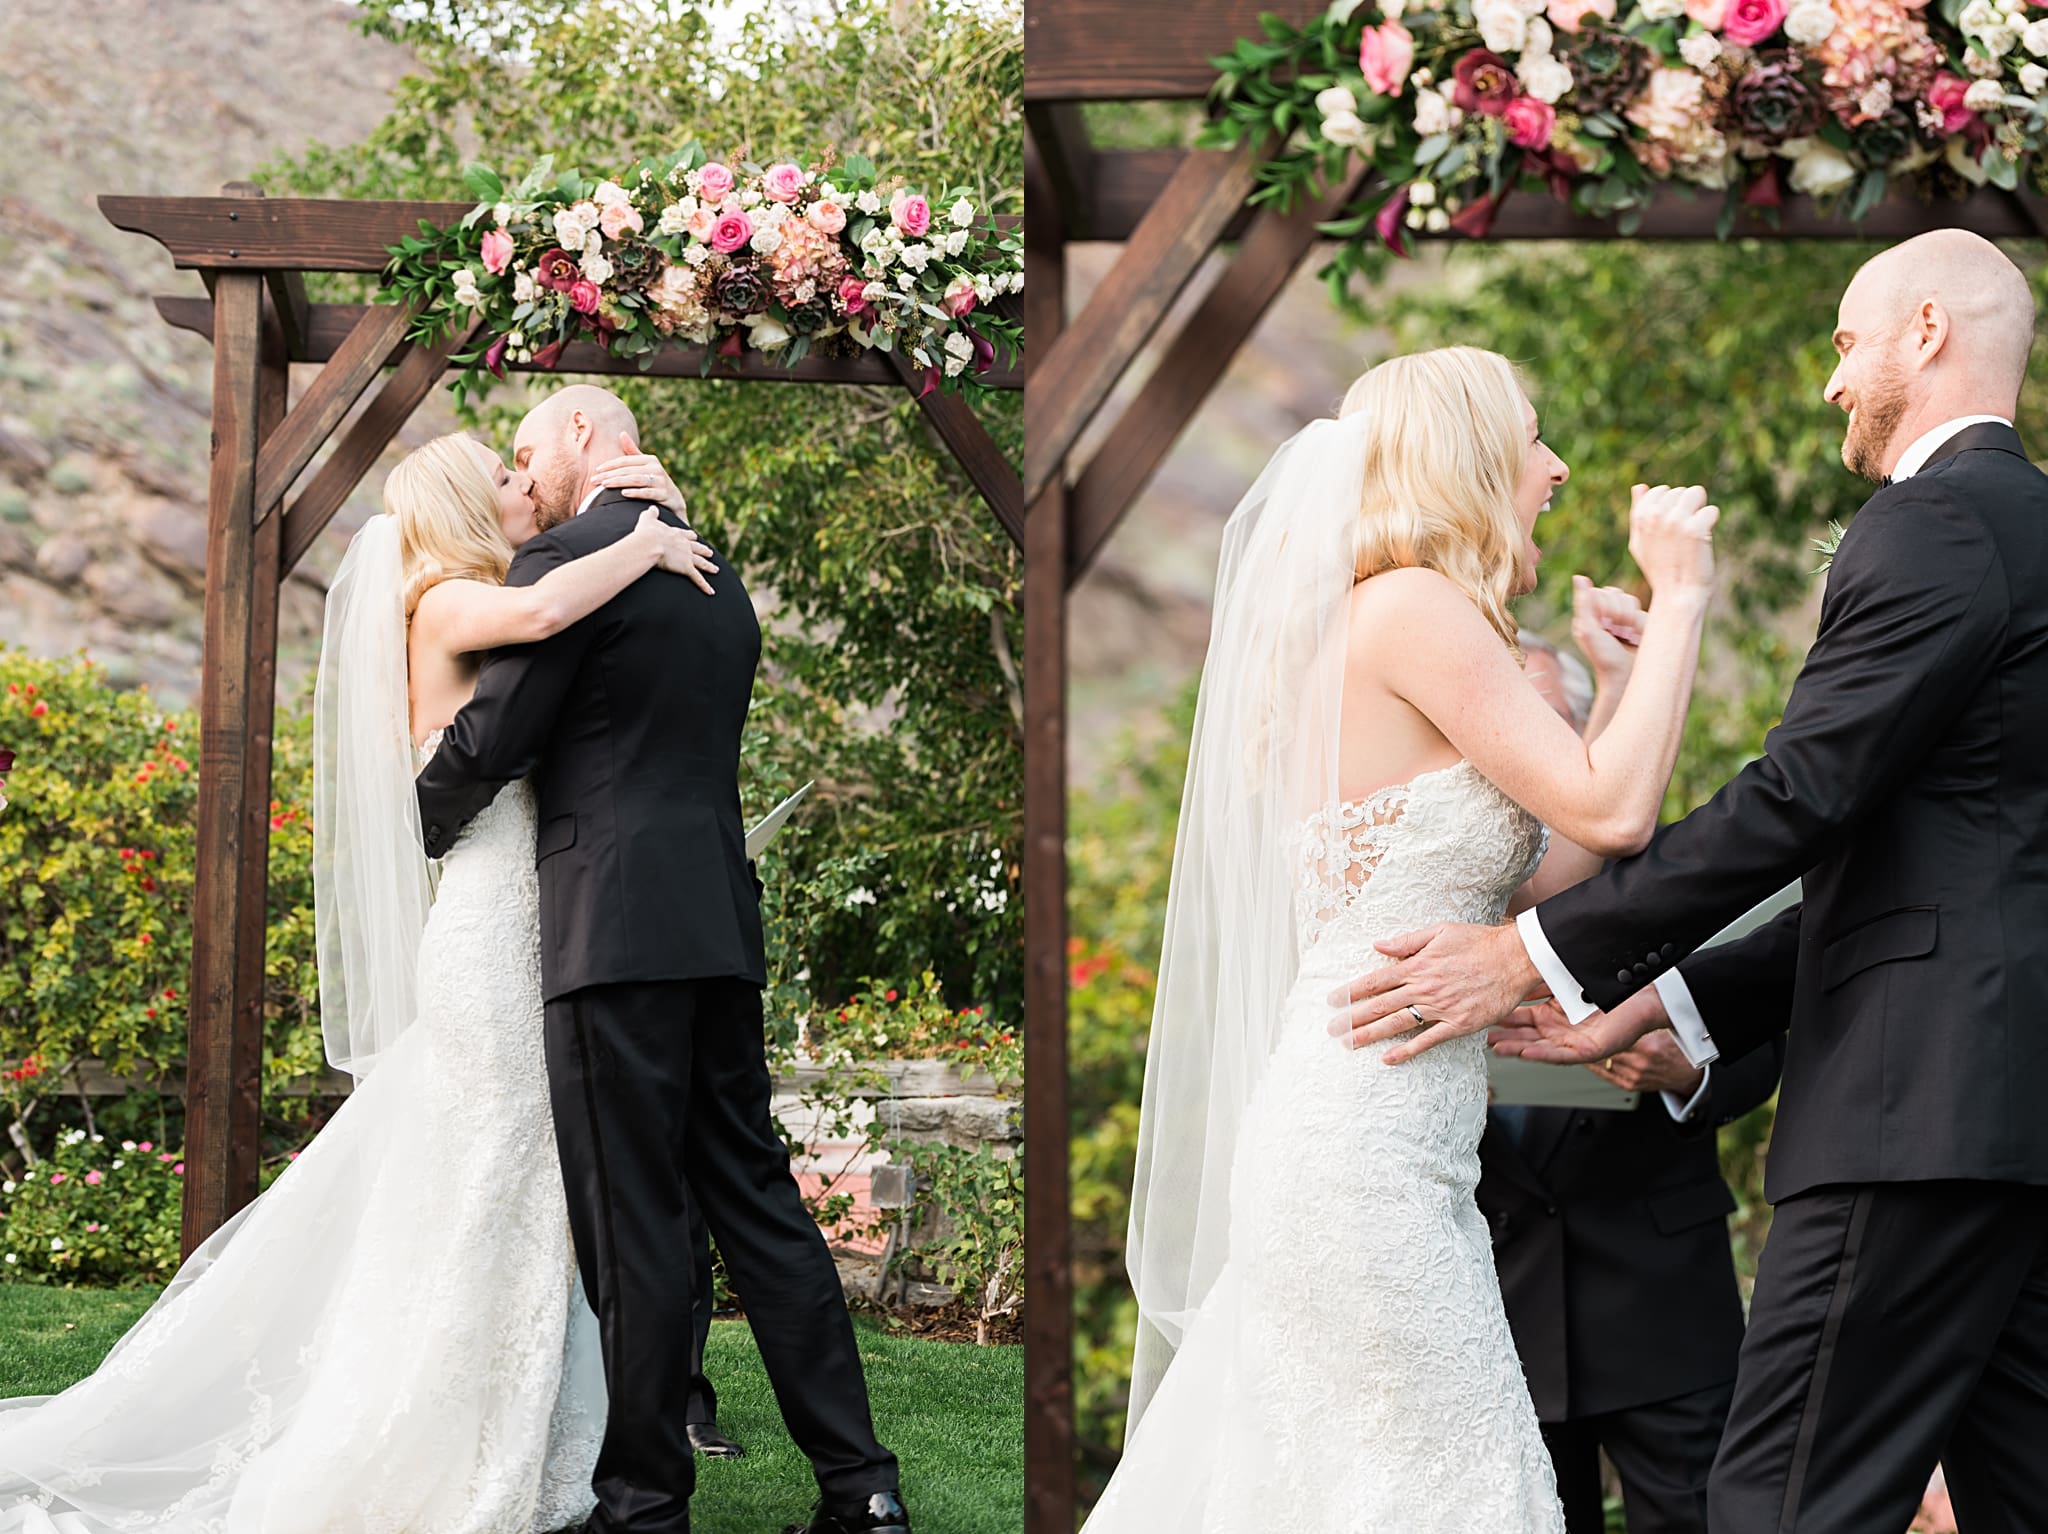 excited bride and groom sharing first kiss at wedding ceremony